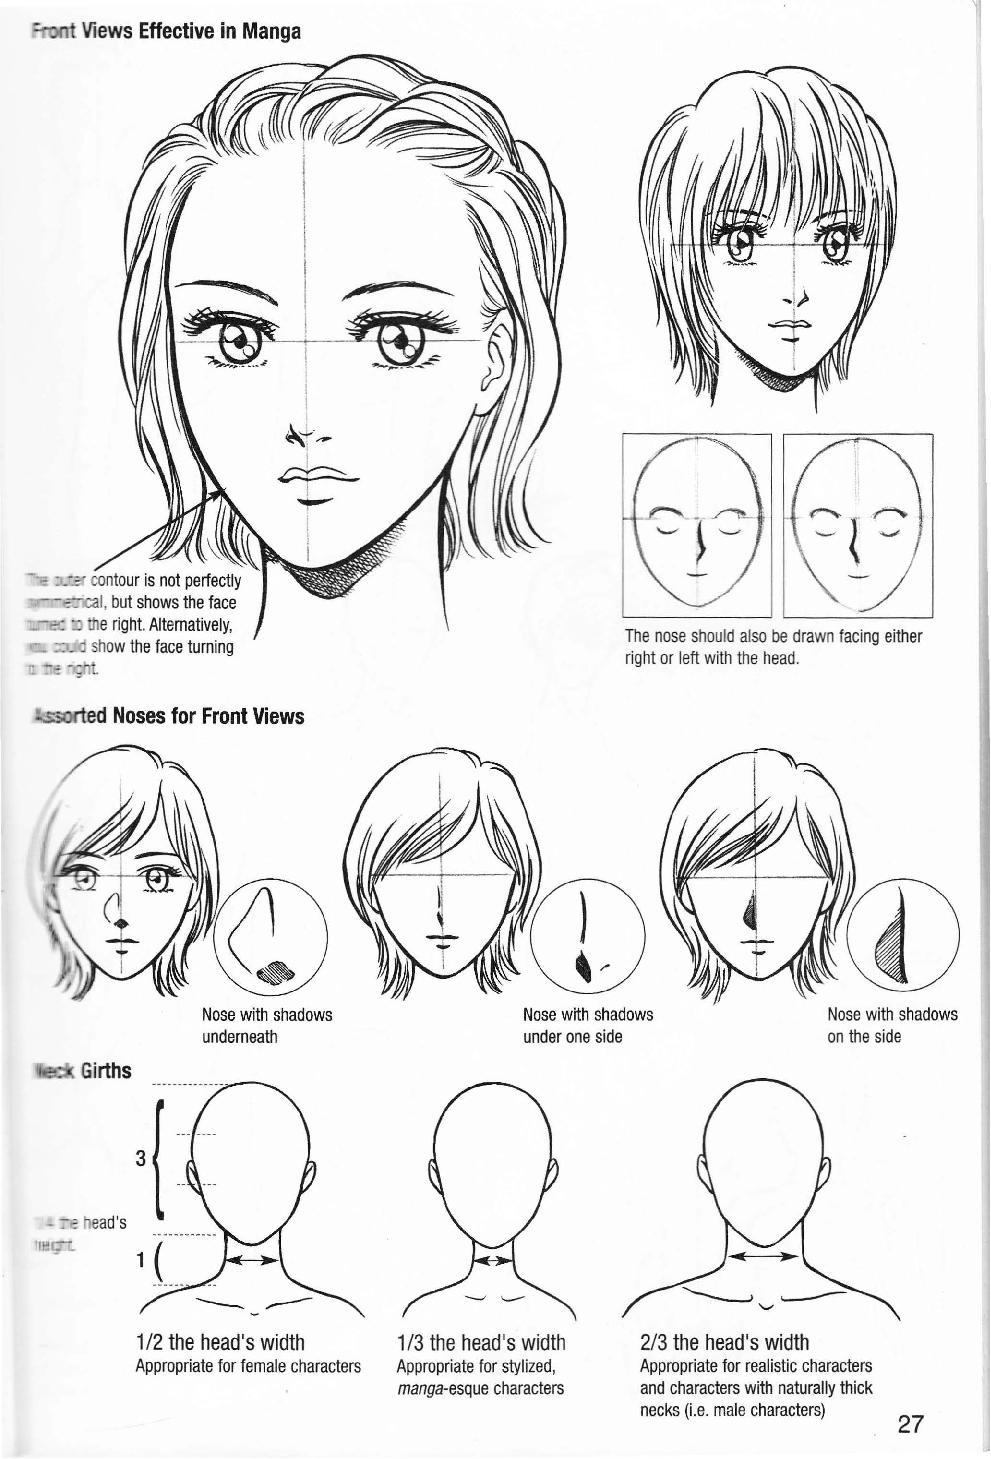 More How to Draw Manga Vol. 2 - Penning Characters 28